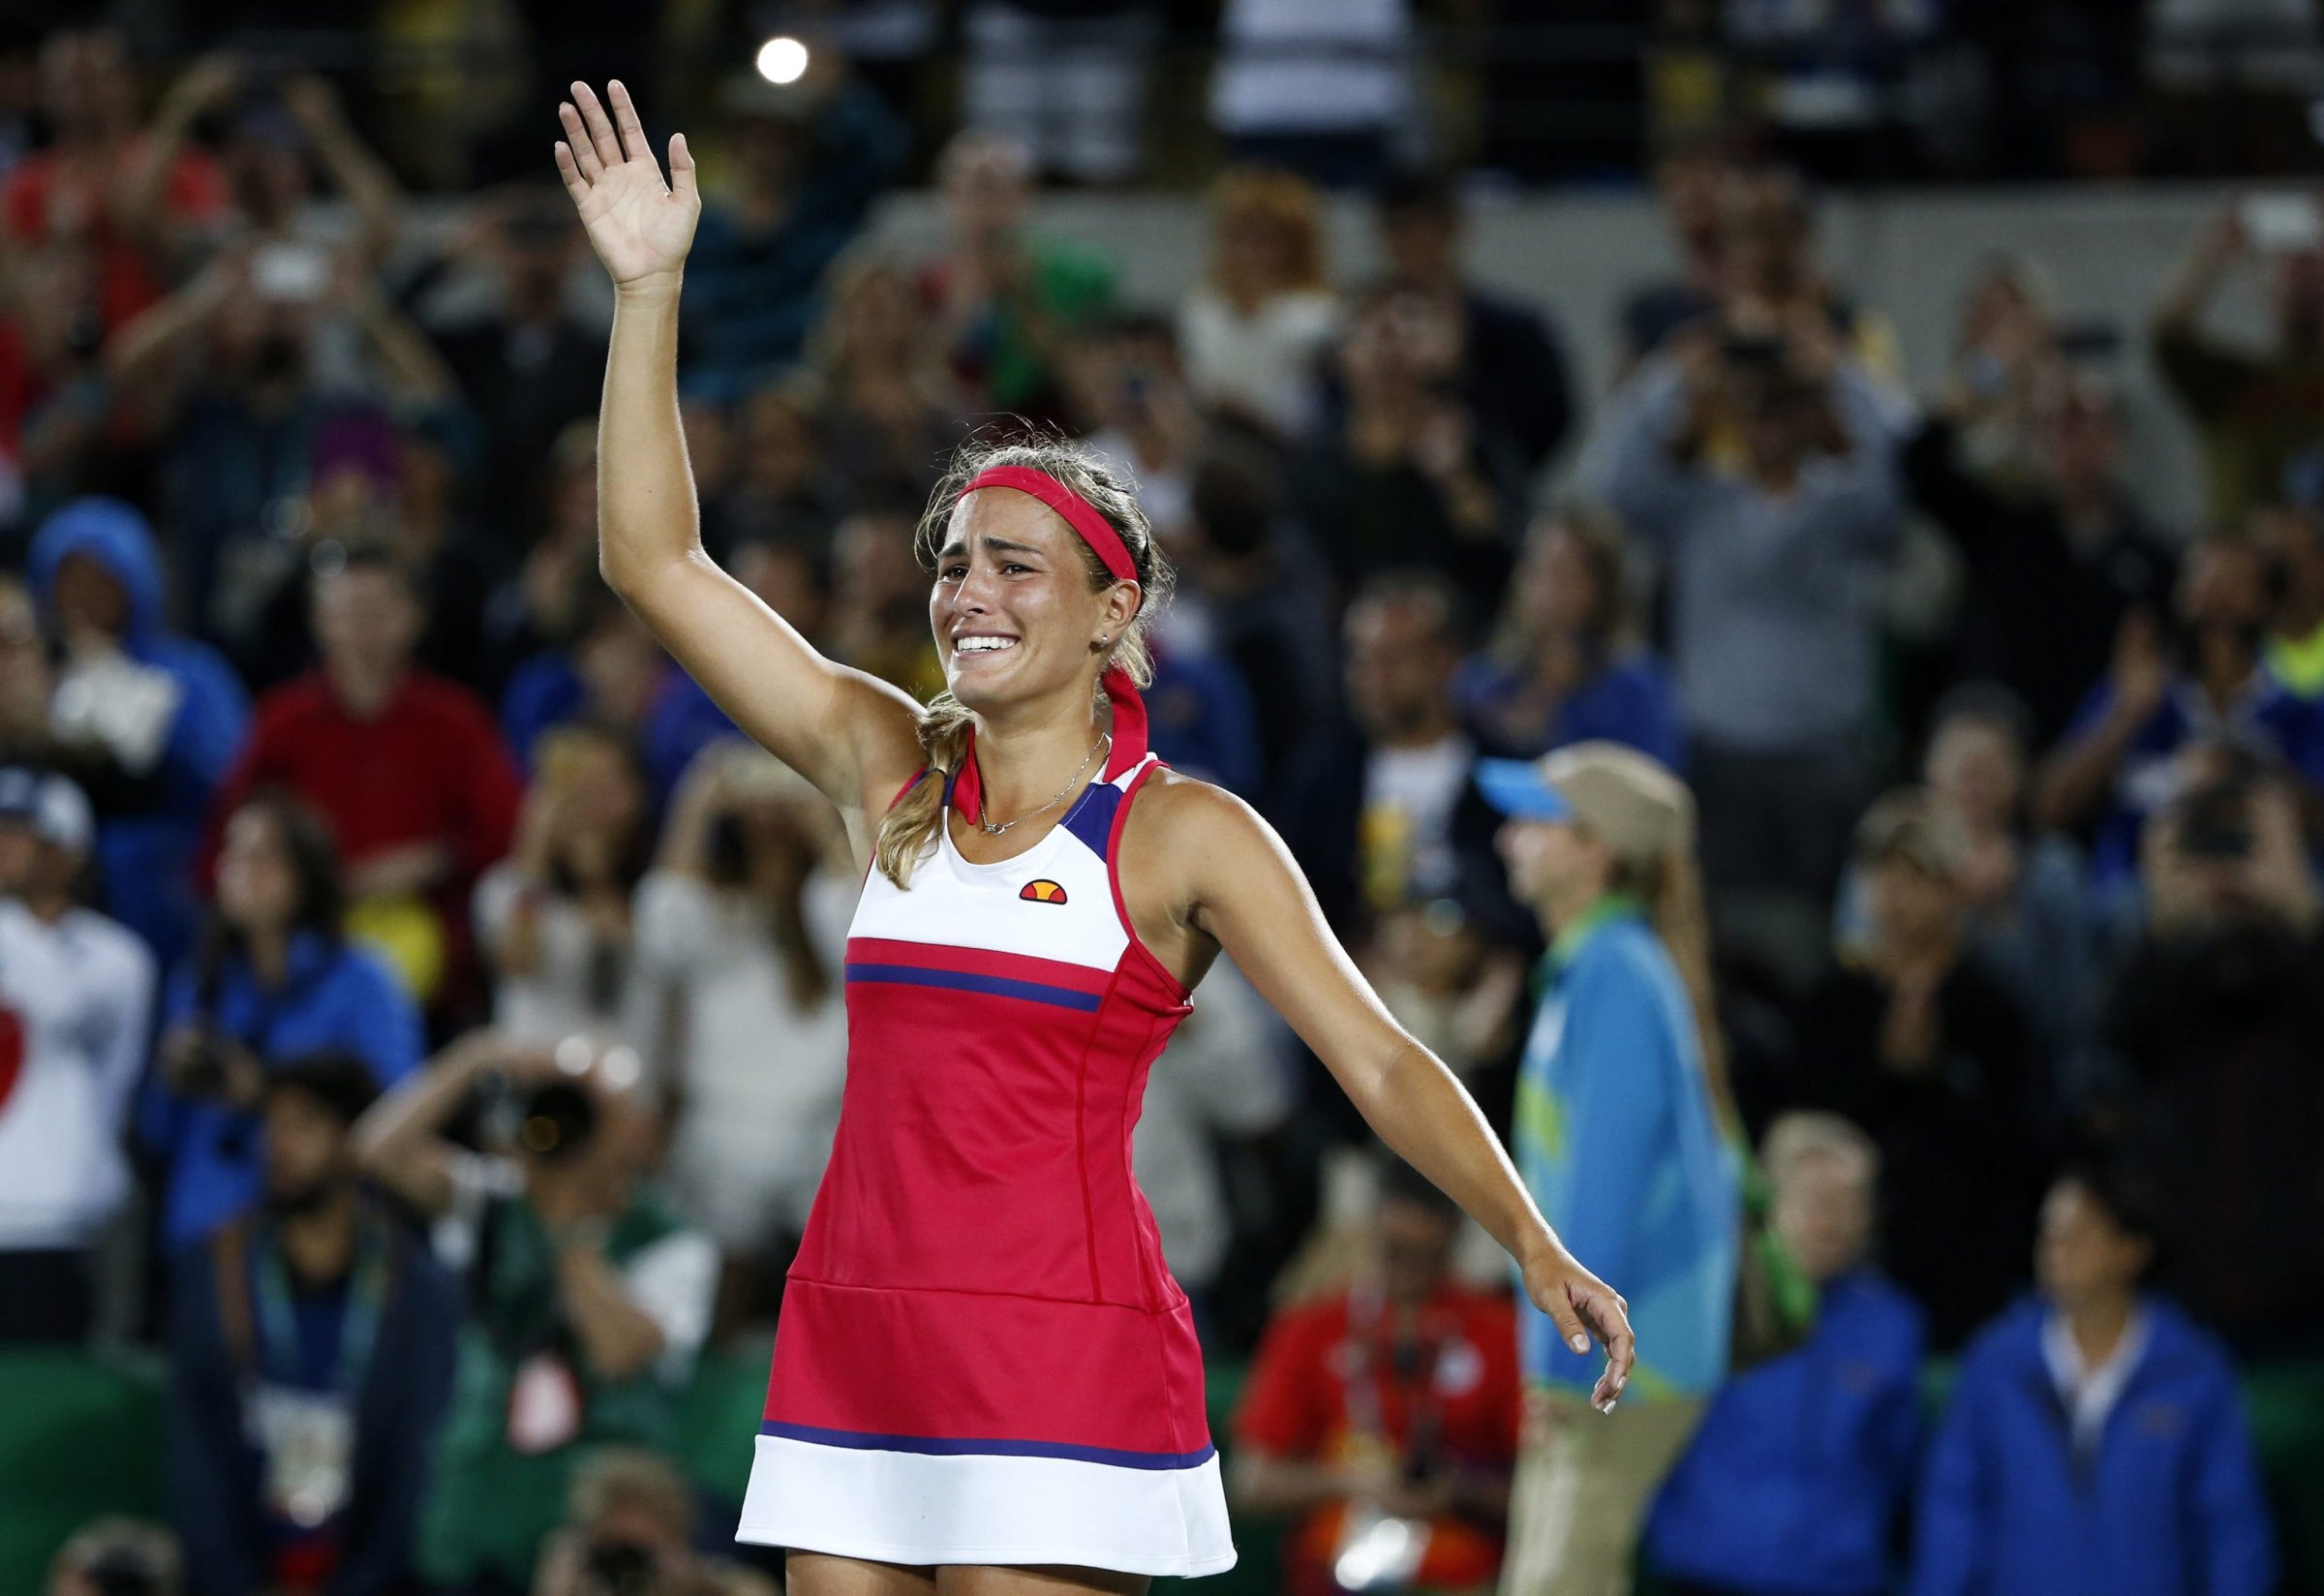 Monica Puig of Puerto Rico celebrates defeating Angelique Kerber of Germany during the women's Singles Gold medal match of the Rio 2016 Olympic Games Tennis events at the Olympic Tennis Centre in the Olympic Park in Rio de Janeiro on Aug. 13, 2016.